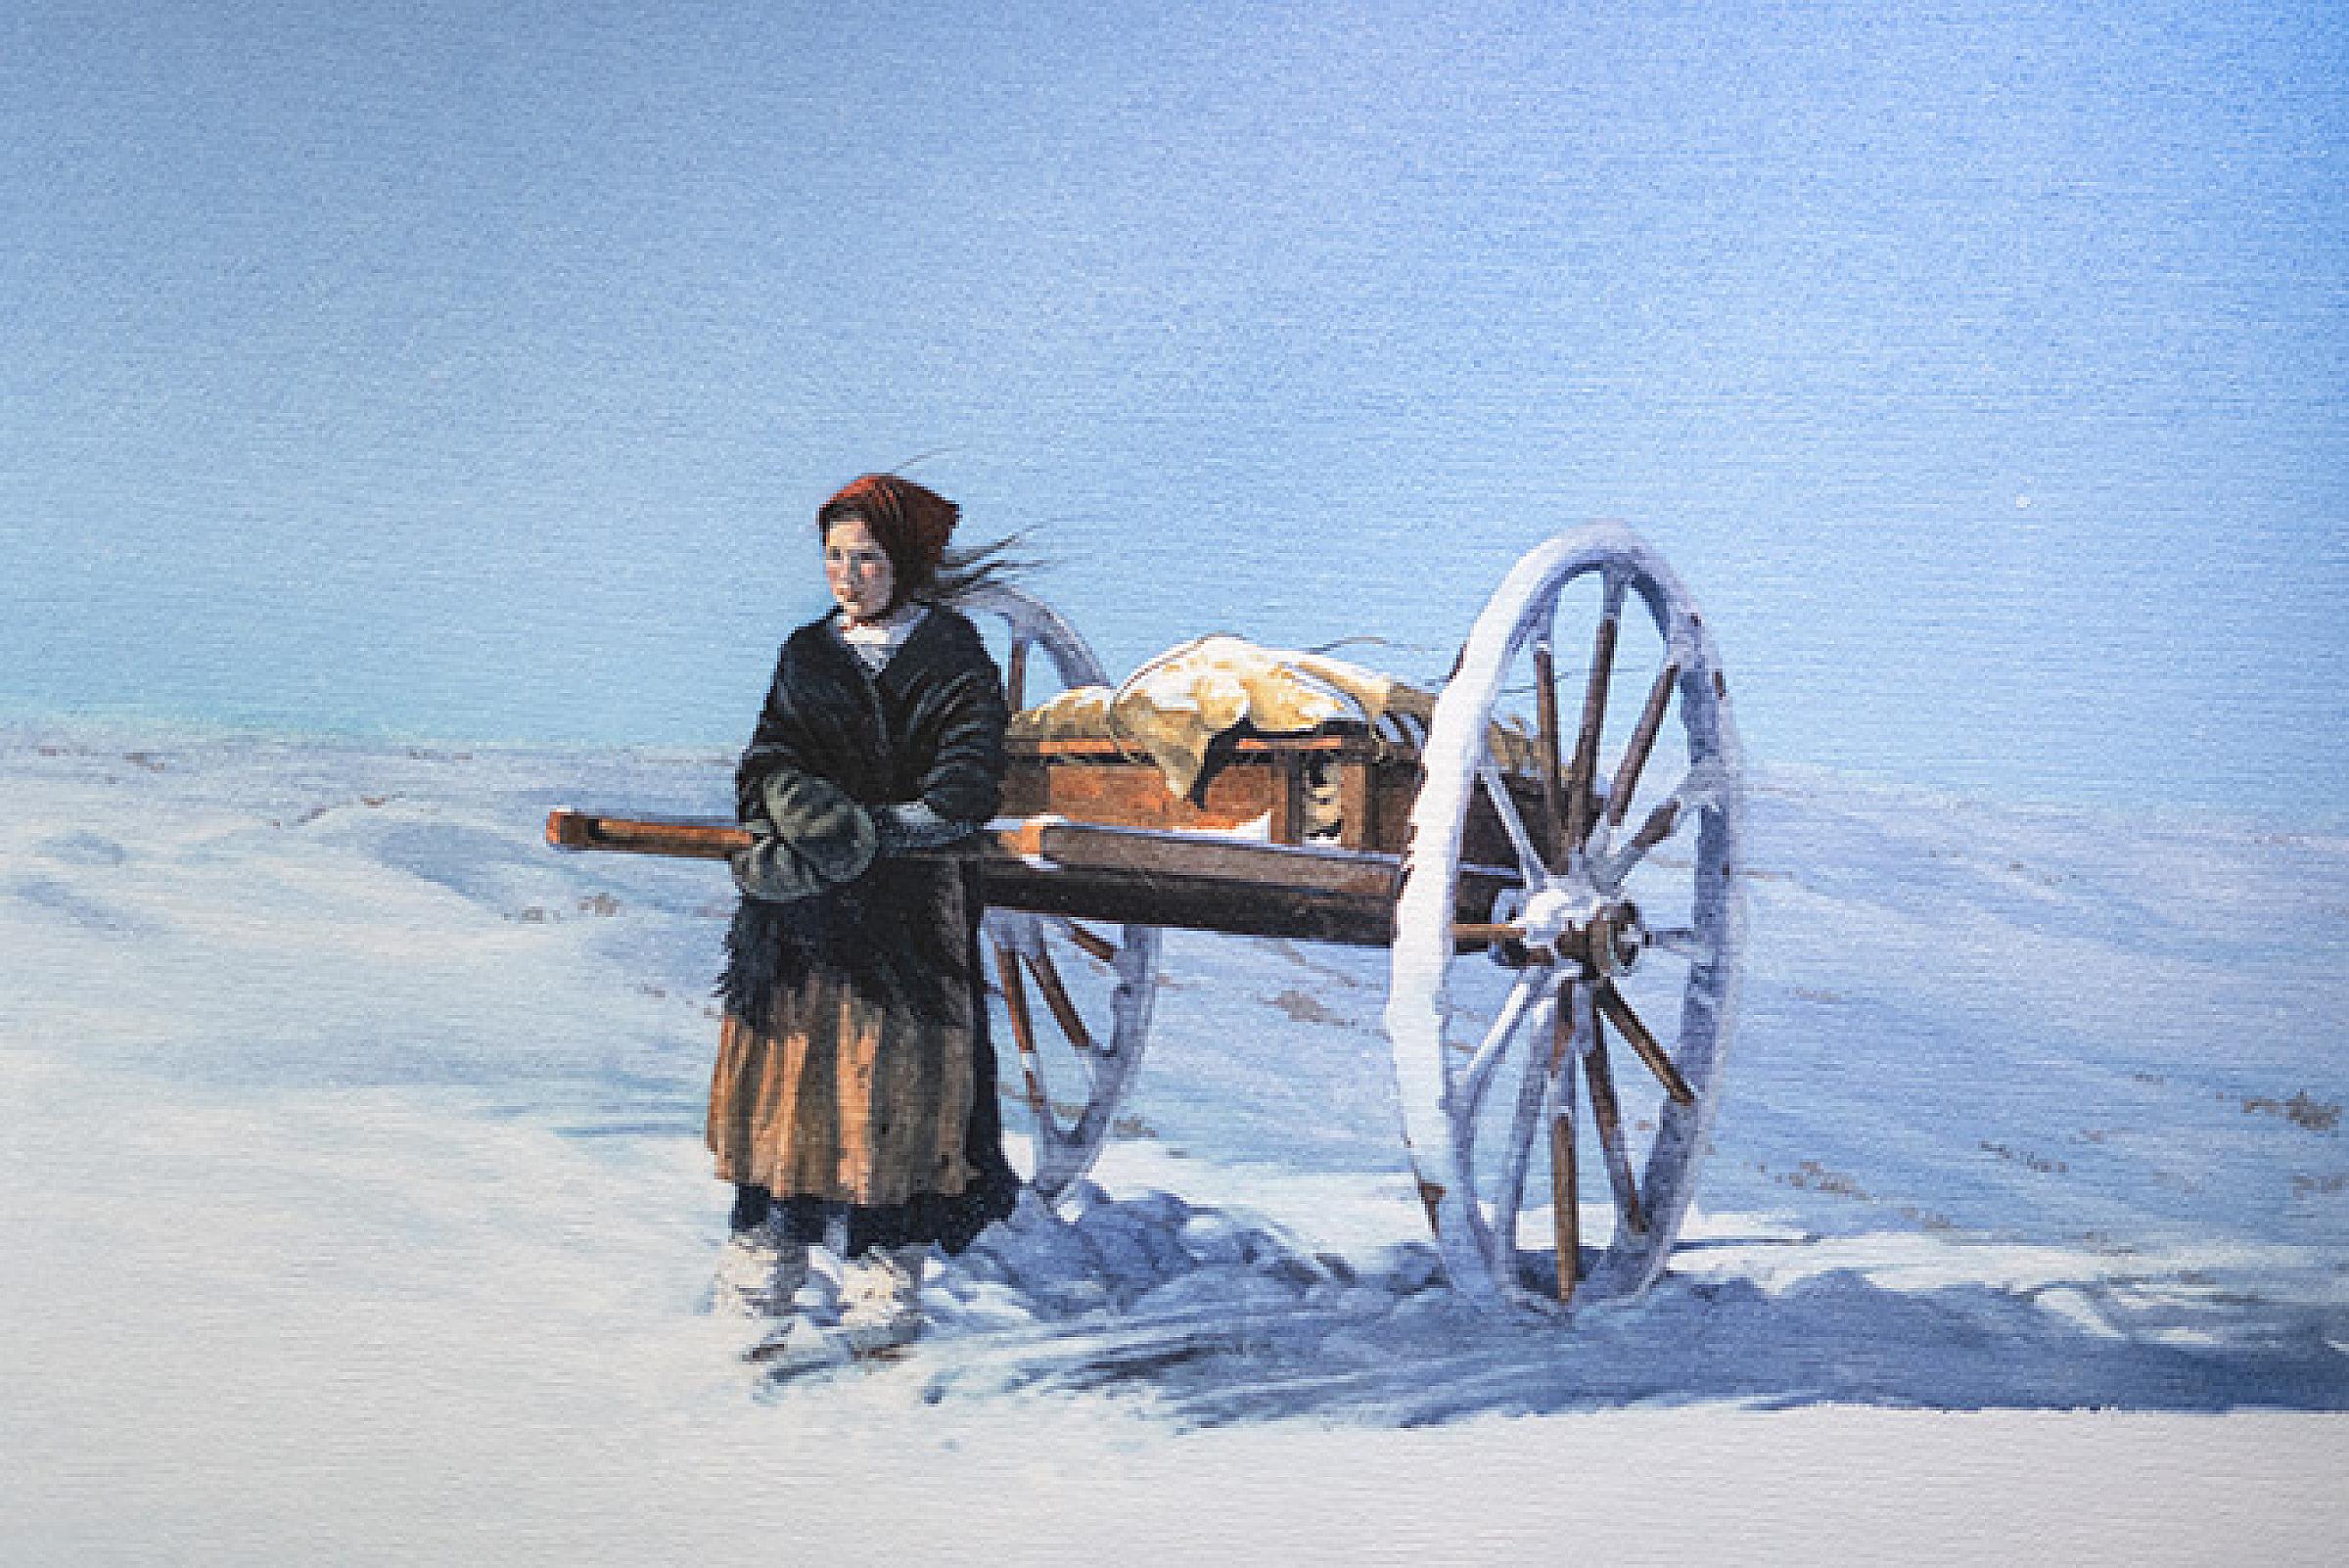 "Trial of Hope...Last Hill" by artist Al Rounds depicts a 13-year-old girl who was part of the Willie handcart company that traveled to Utah in 1856. You can see hope and fortitude in the girl’s face as she braves a ruthlessly cold and unforgiving journey.